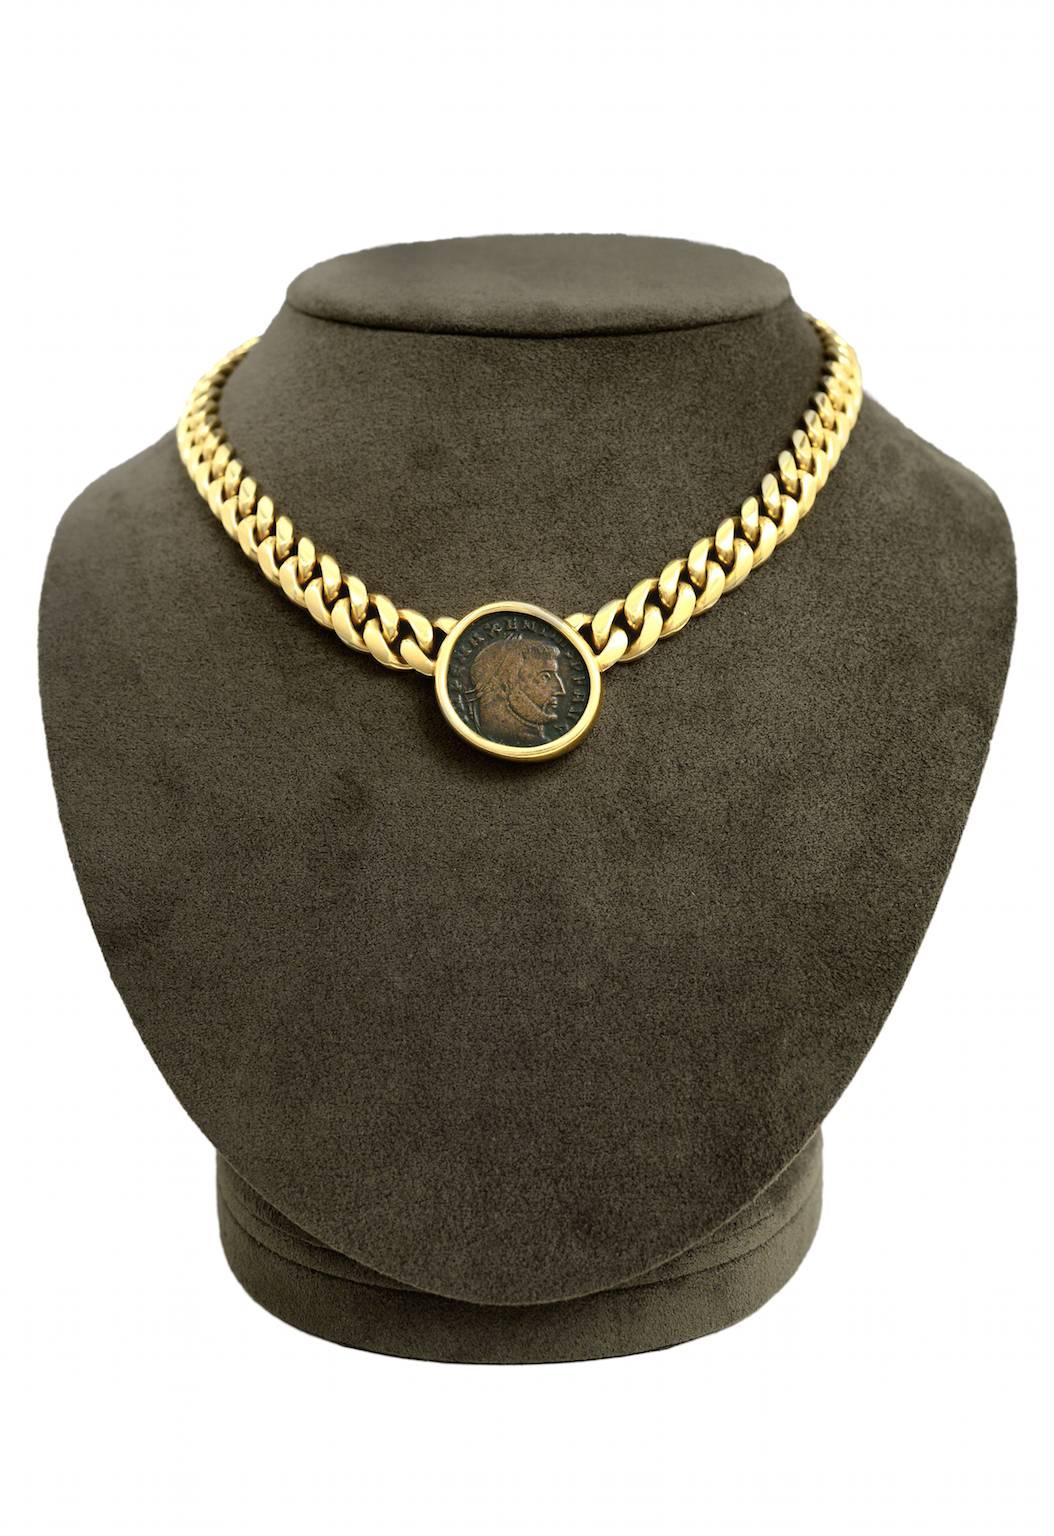 A classic and large Bulgari Monete necklace with heavy 18K gold curb link chain. Coin dates 306 - 312 AD. Stamped BULGARI ITALY on back of clasp. Necklace circa 1970's. 

*Please contact for addition images or information. 